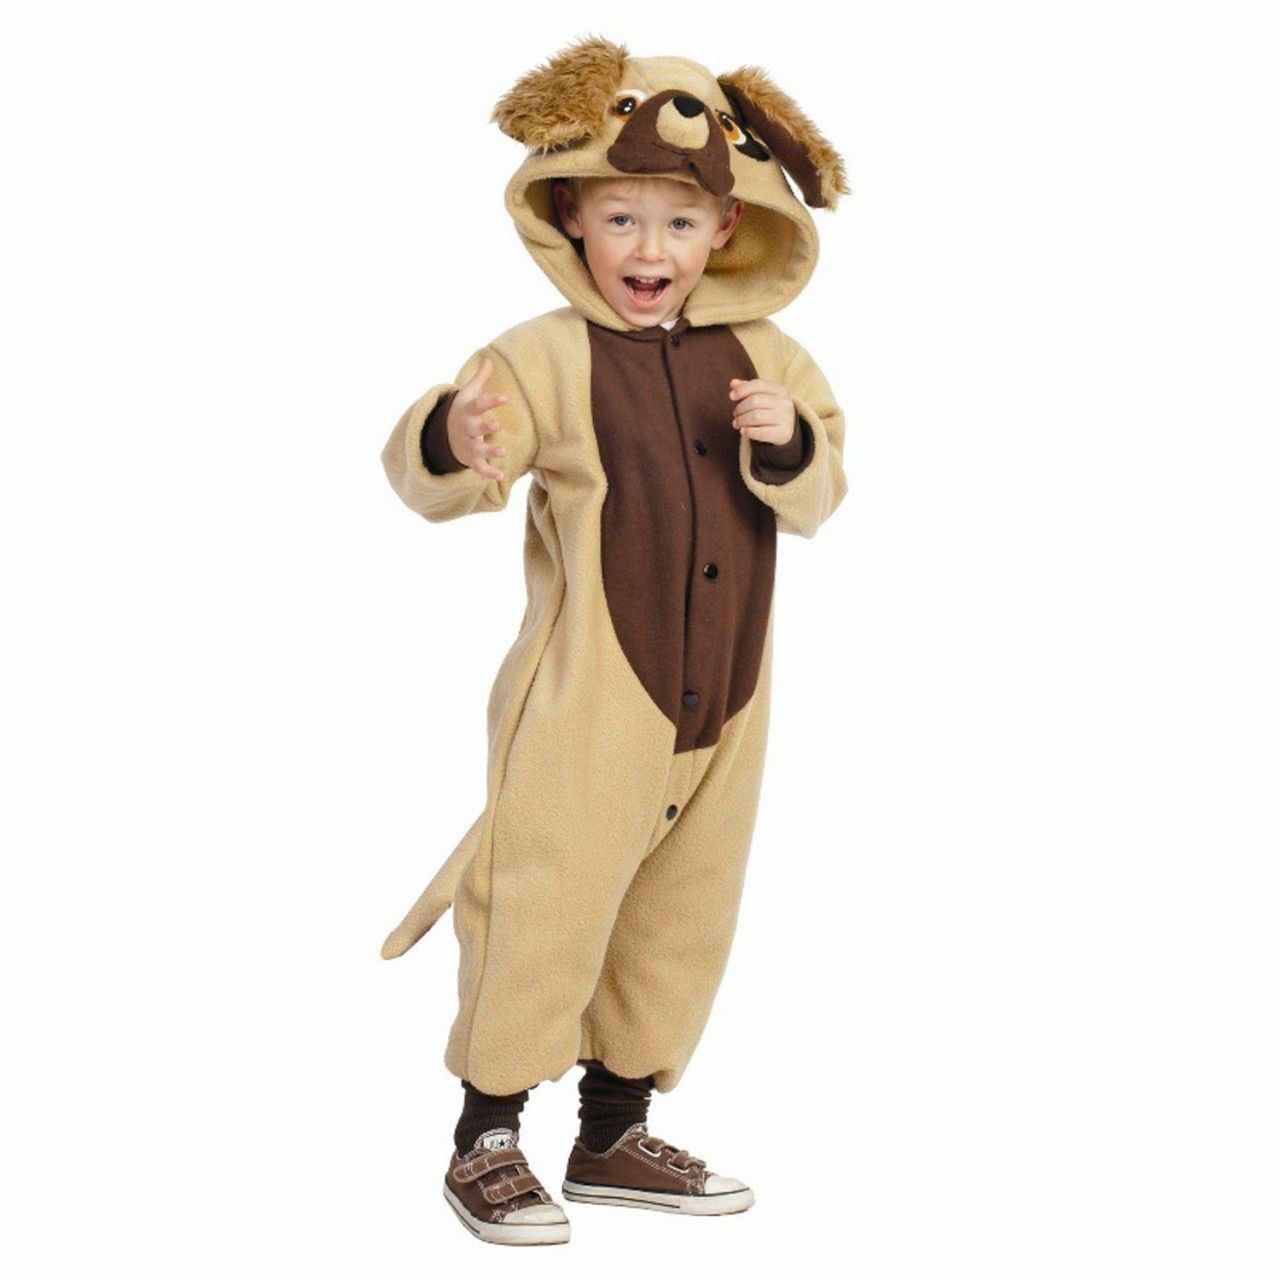 DIY Dog Costume For Child
 Pin by Nancy Meadows on Costumes